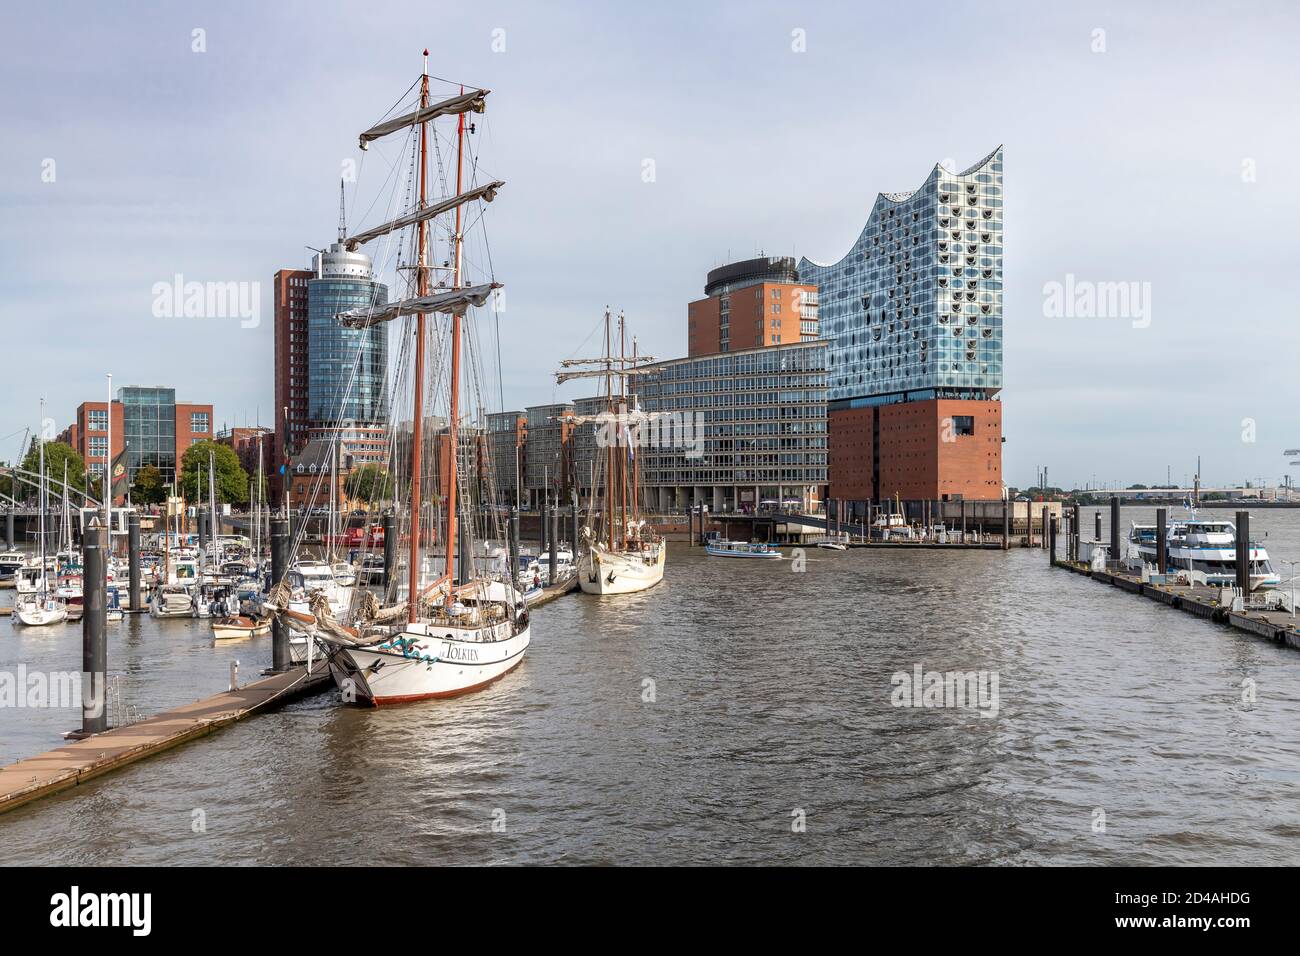 The Elbphilharmonie is a concert hall in the HafenCity quarter of Hamburg, Germany, on a peninsula of the Elbe River. Popularly nicknamed Elphi. Stock Photo